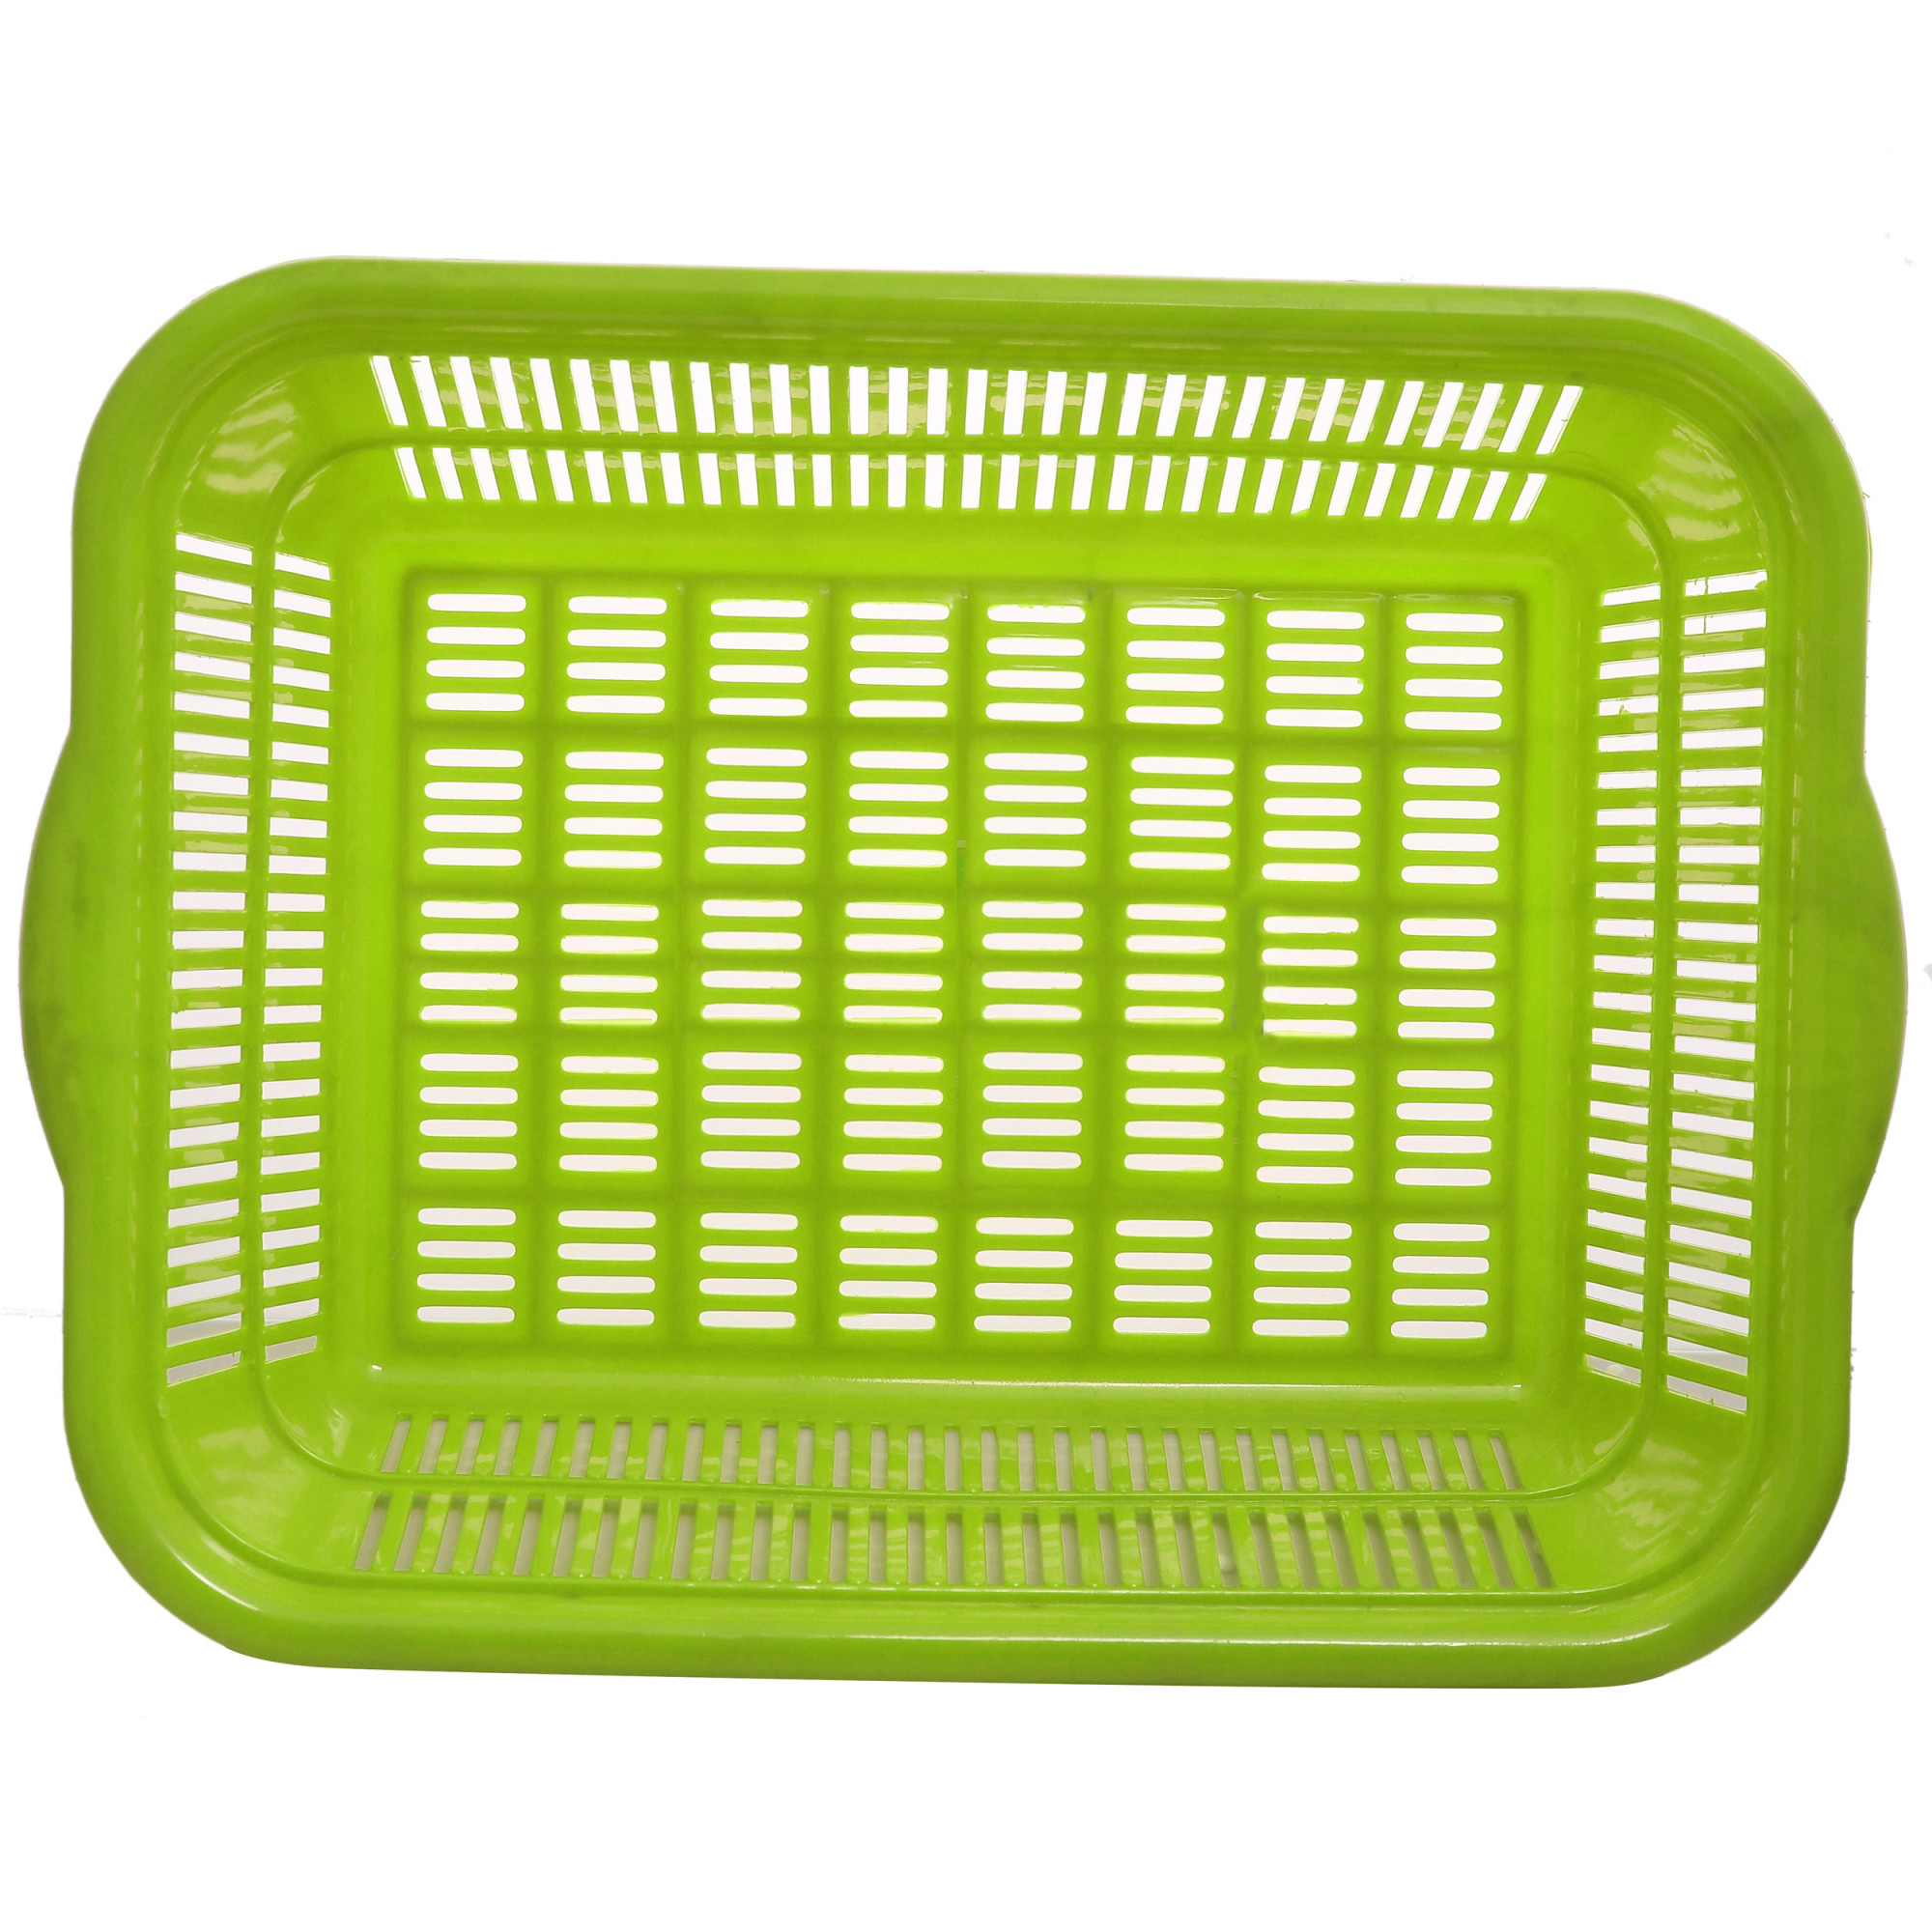 Kuber Industries Plastic 3 Pieces Kitchen Small Size Dish Rack Drainer Vegetables And Fruits Washing Basket Dish Rack Multipurpose Organizers (Green & Blue & Yellow)-KUBMART632